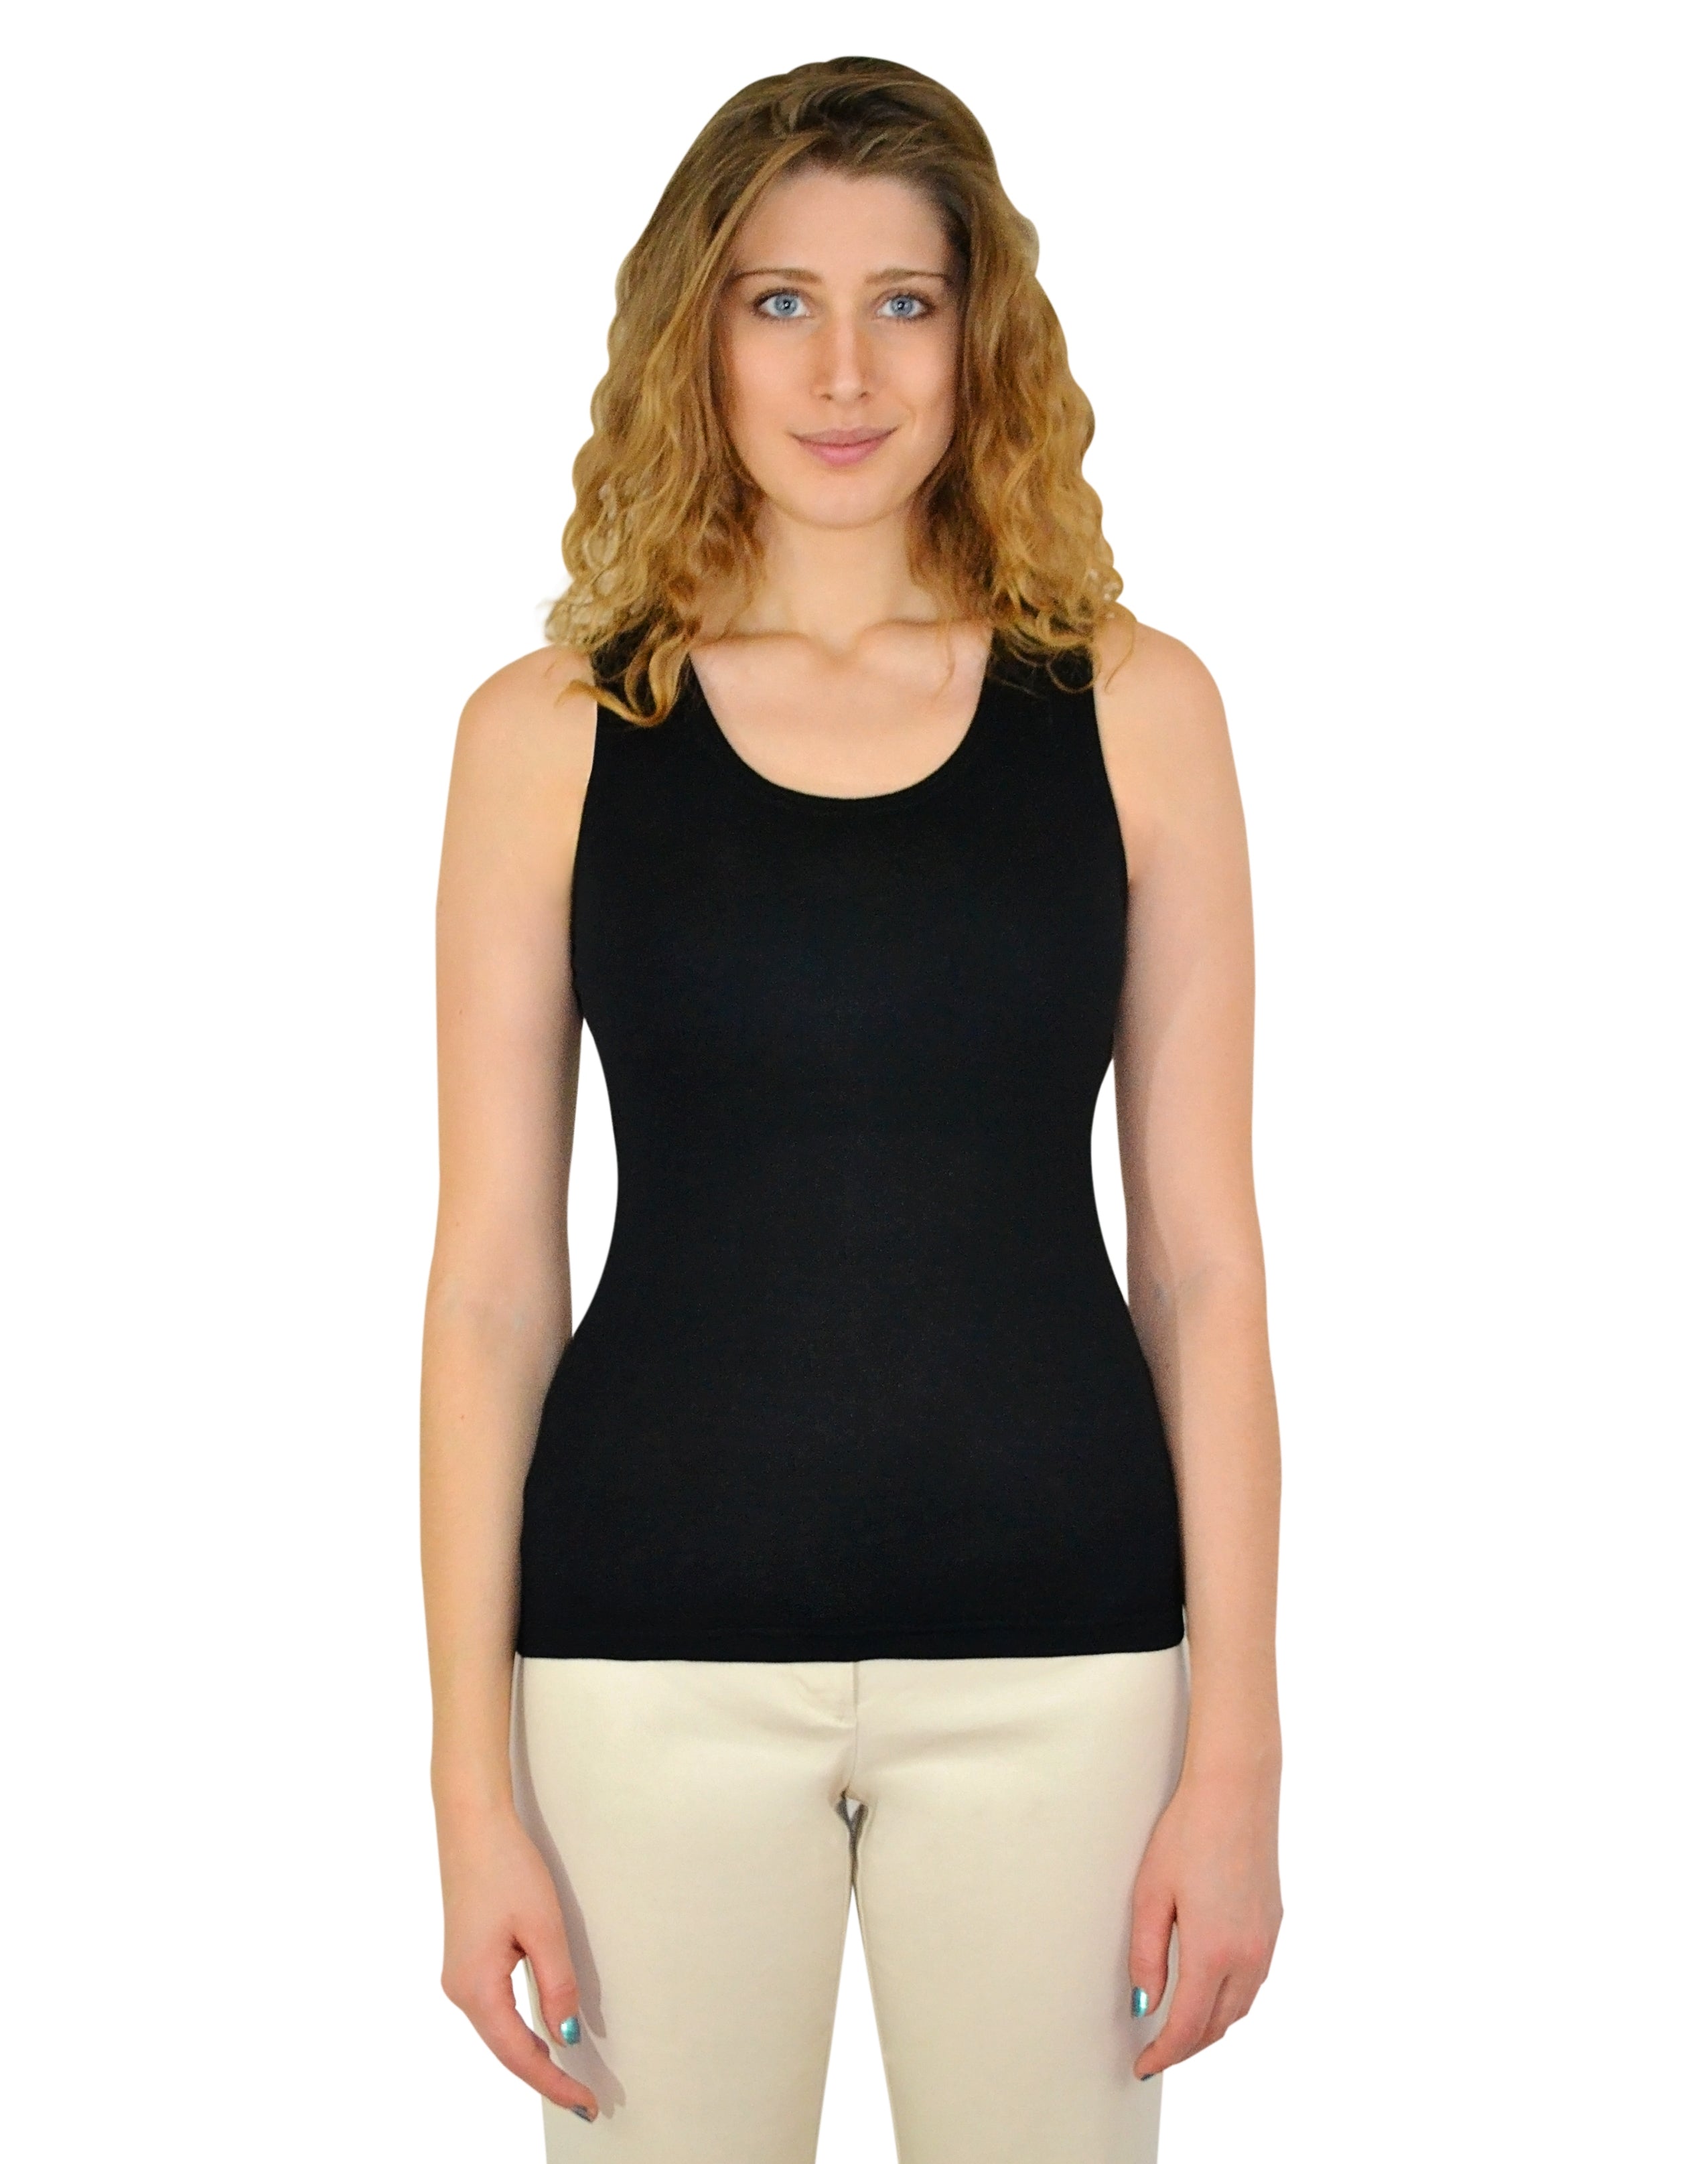 Full Coverage Tank Top (Two Colors Available) – Exclusively Kristen